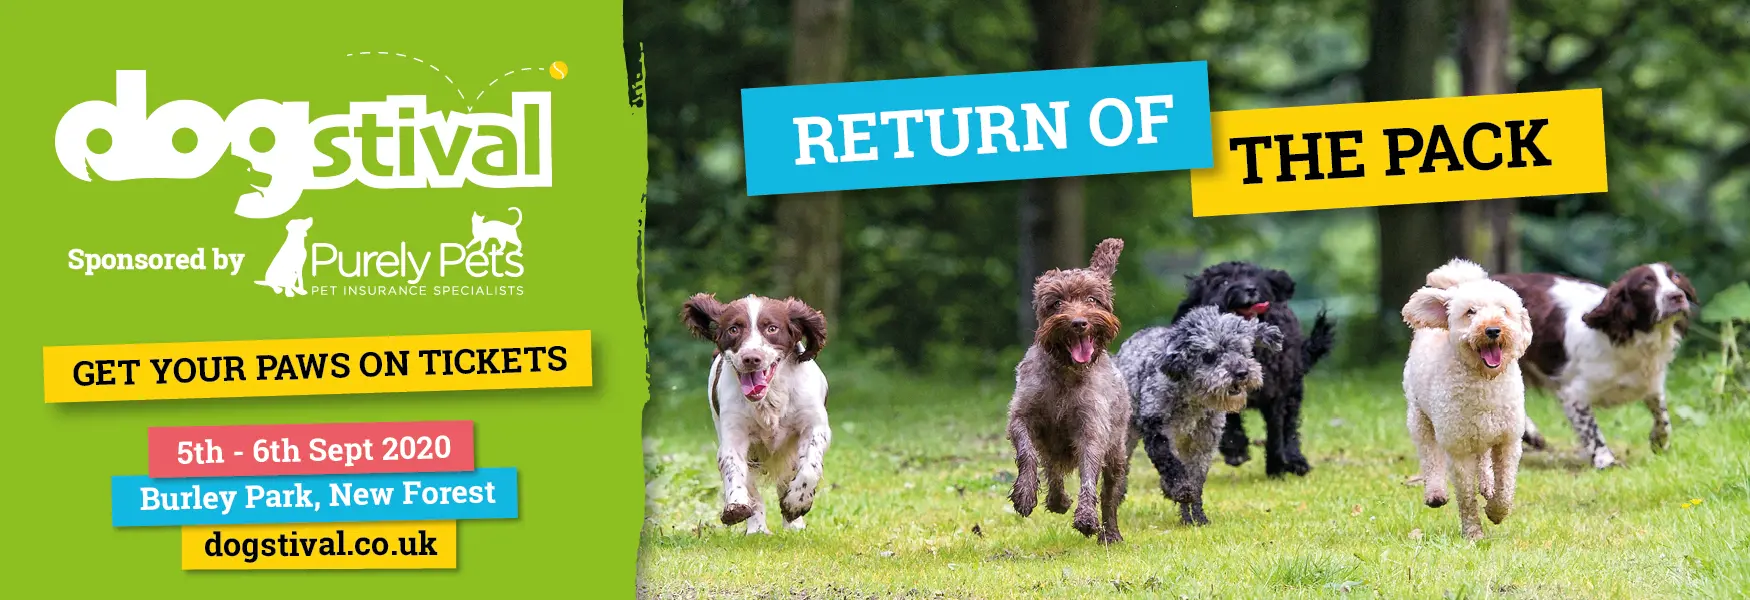 RETURN OF THE PACK - DOGSTIVAL 2020, THE ONLY GUEST LIST YOUR DOG WANTS TO BE ON!